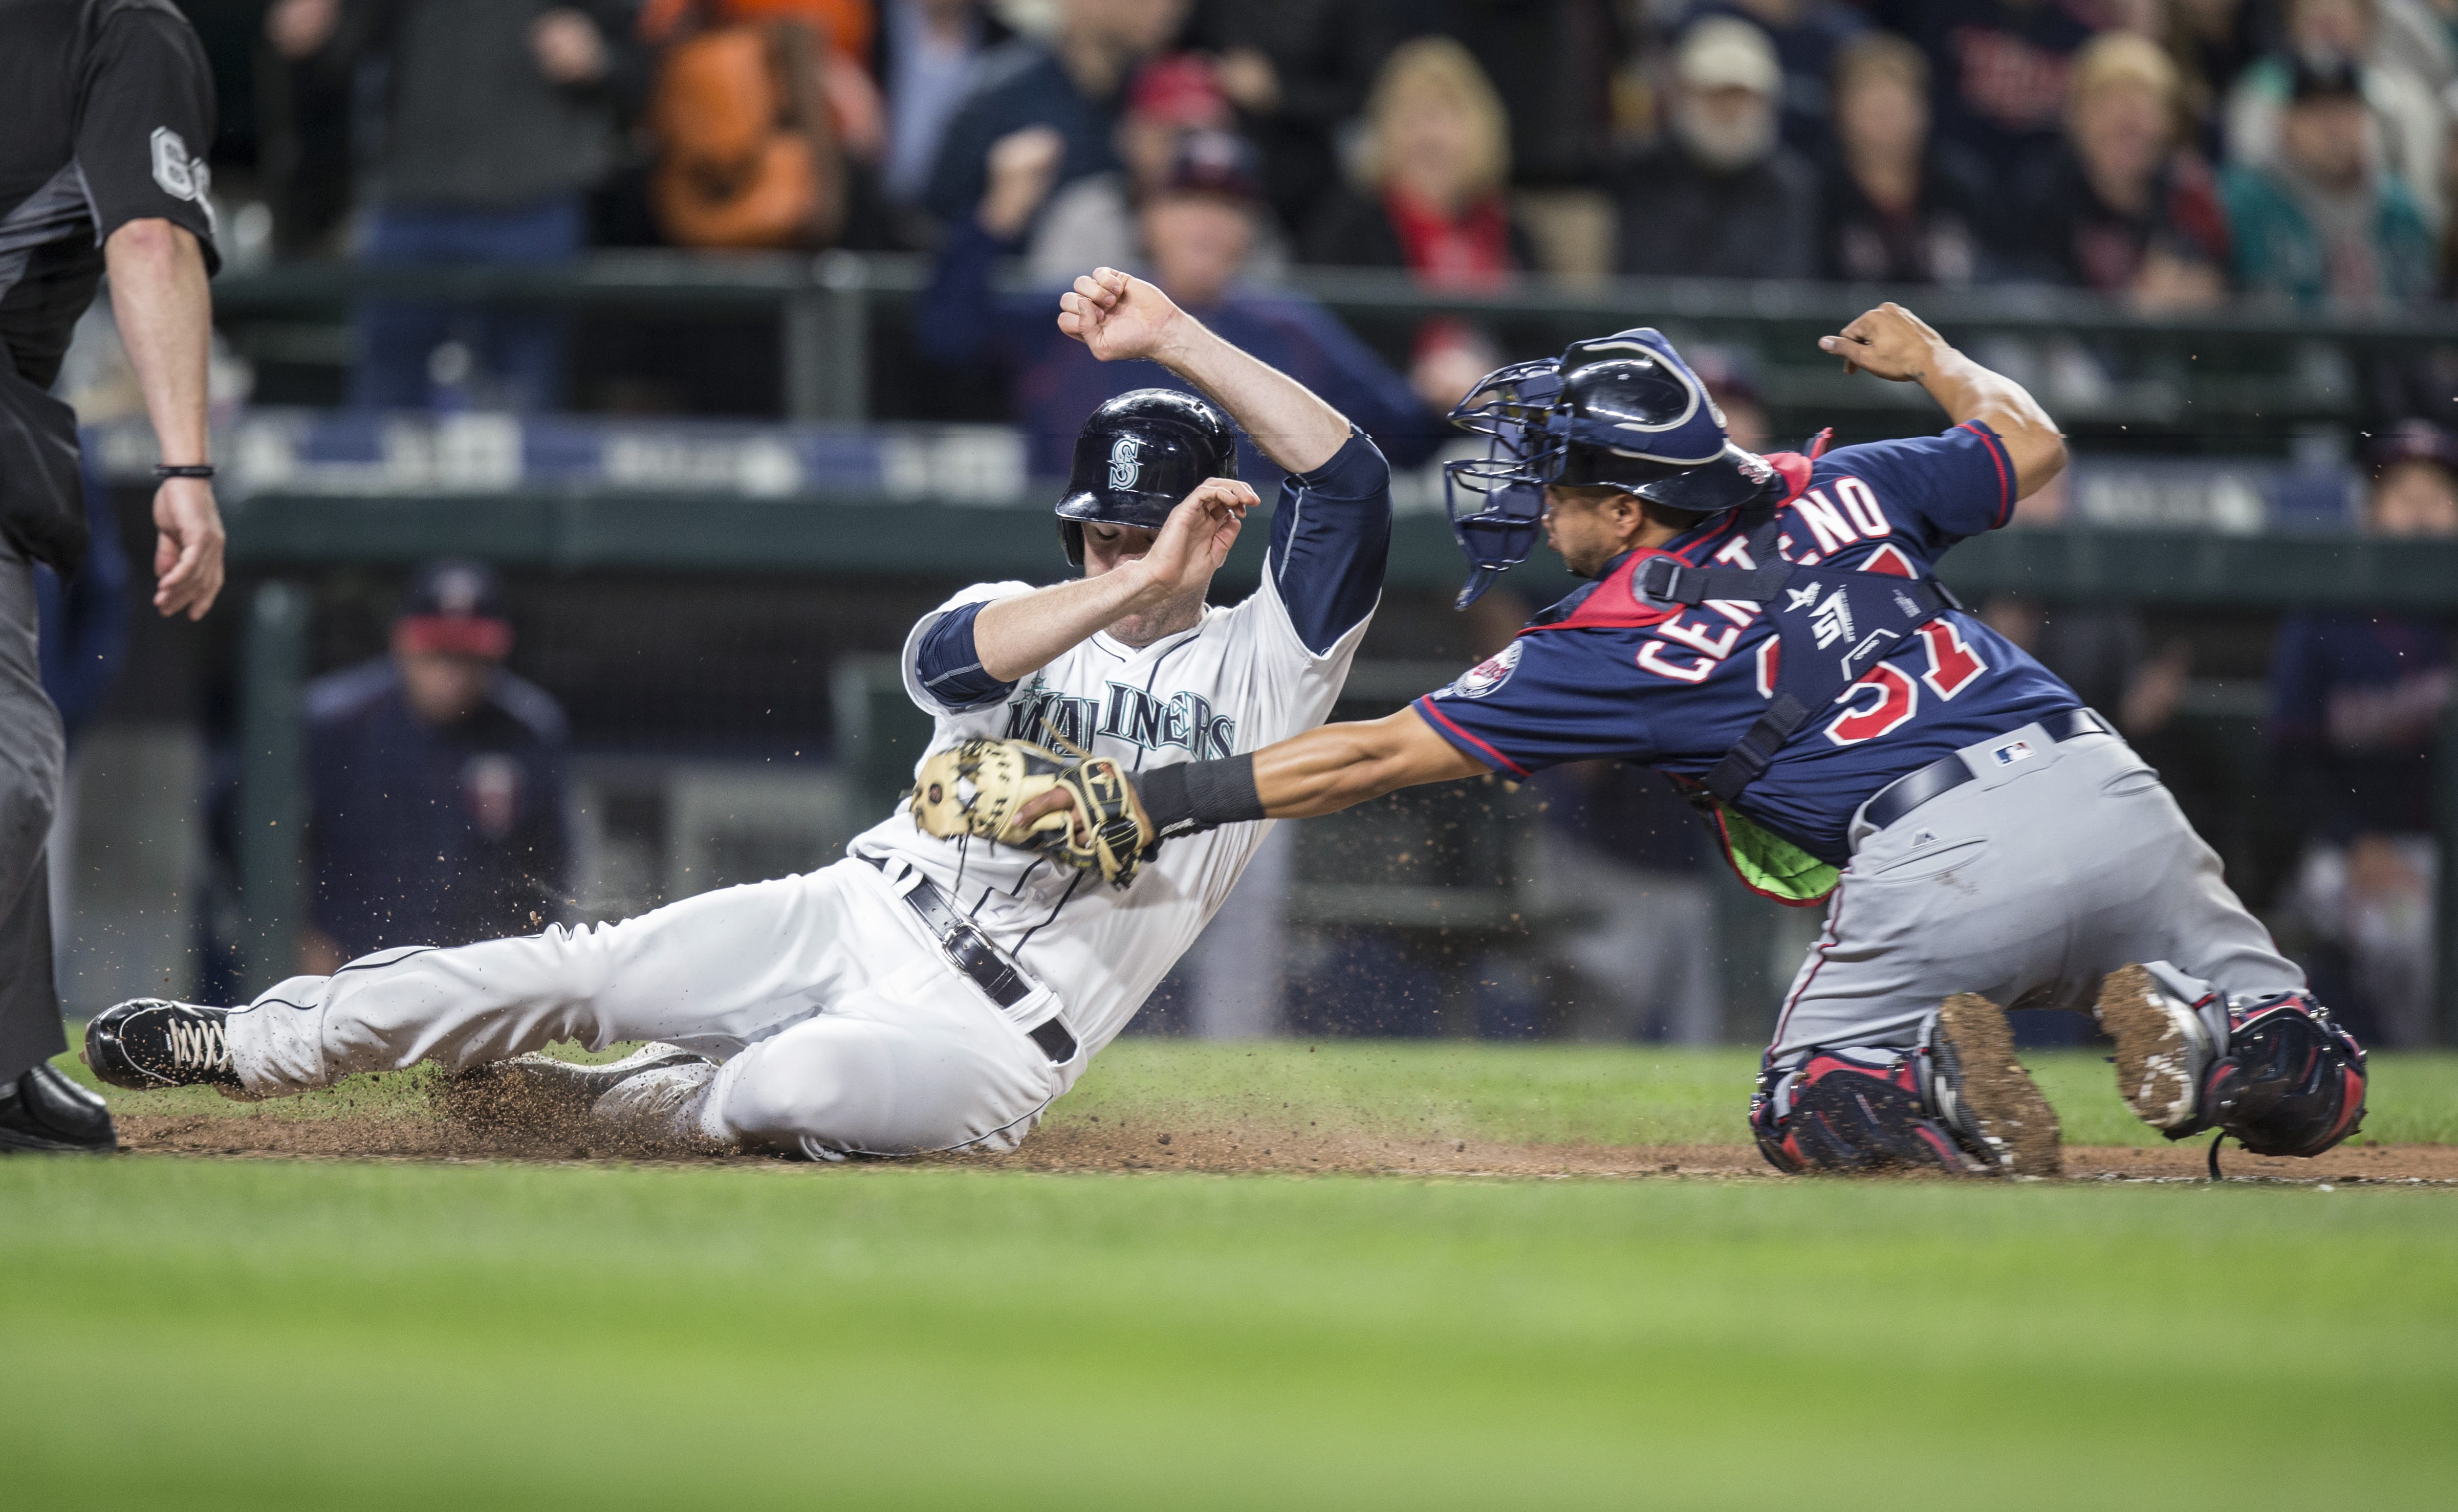 Seattle Mariners' Seth Smith, left, is tagged out at home plate by Minnesota Twins catcher Juan Centeno during the sixth inning of a baseball game  Saturday, May 28, 2016, in Seattle.